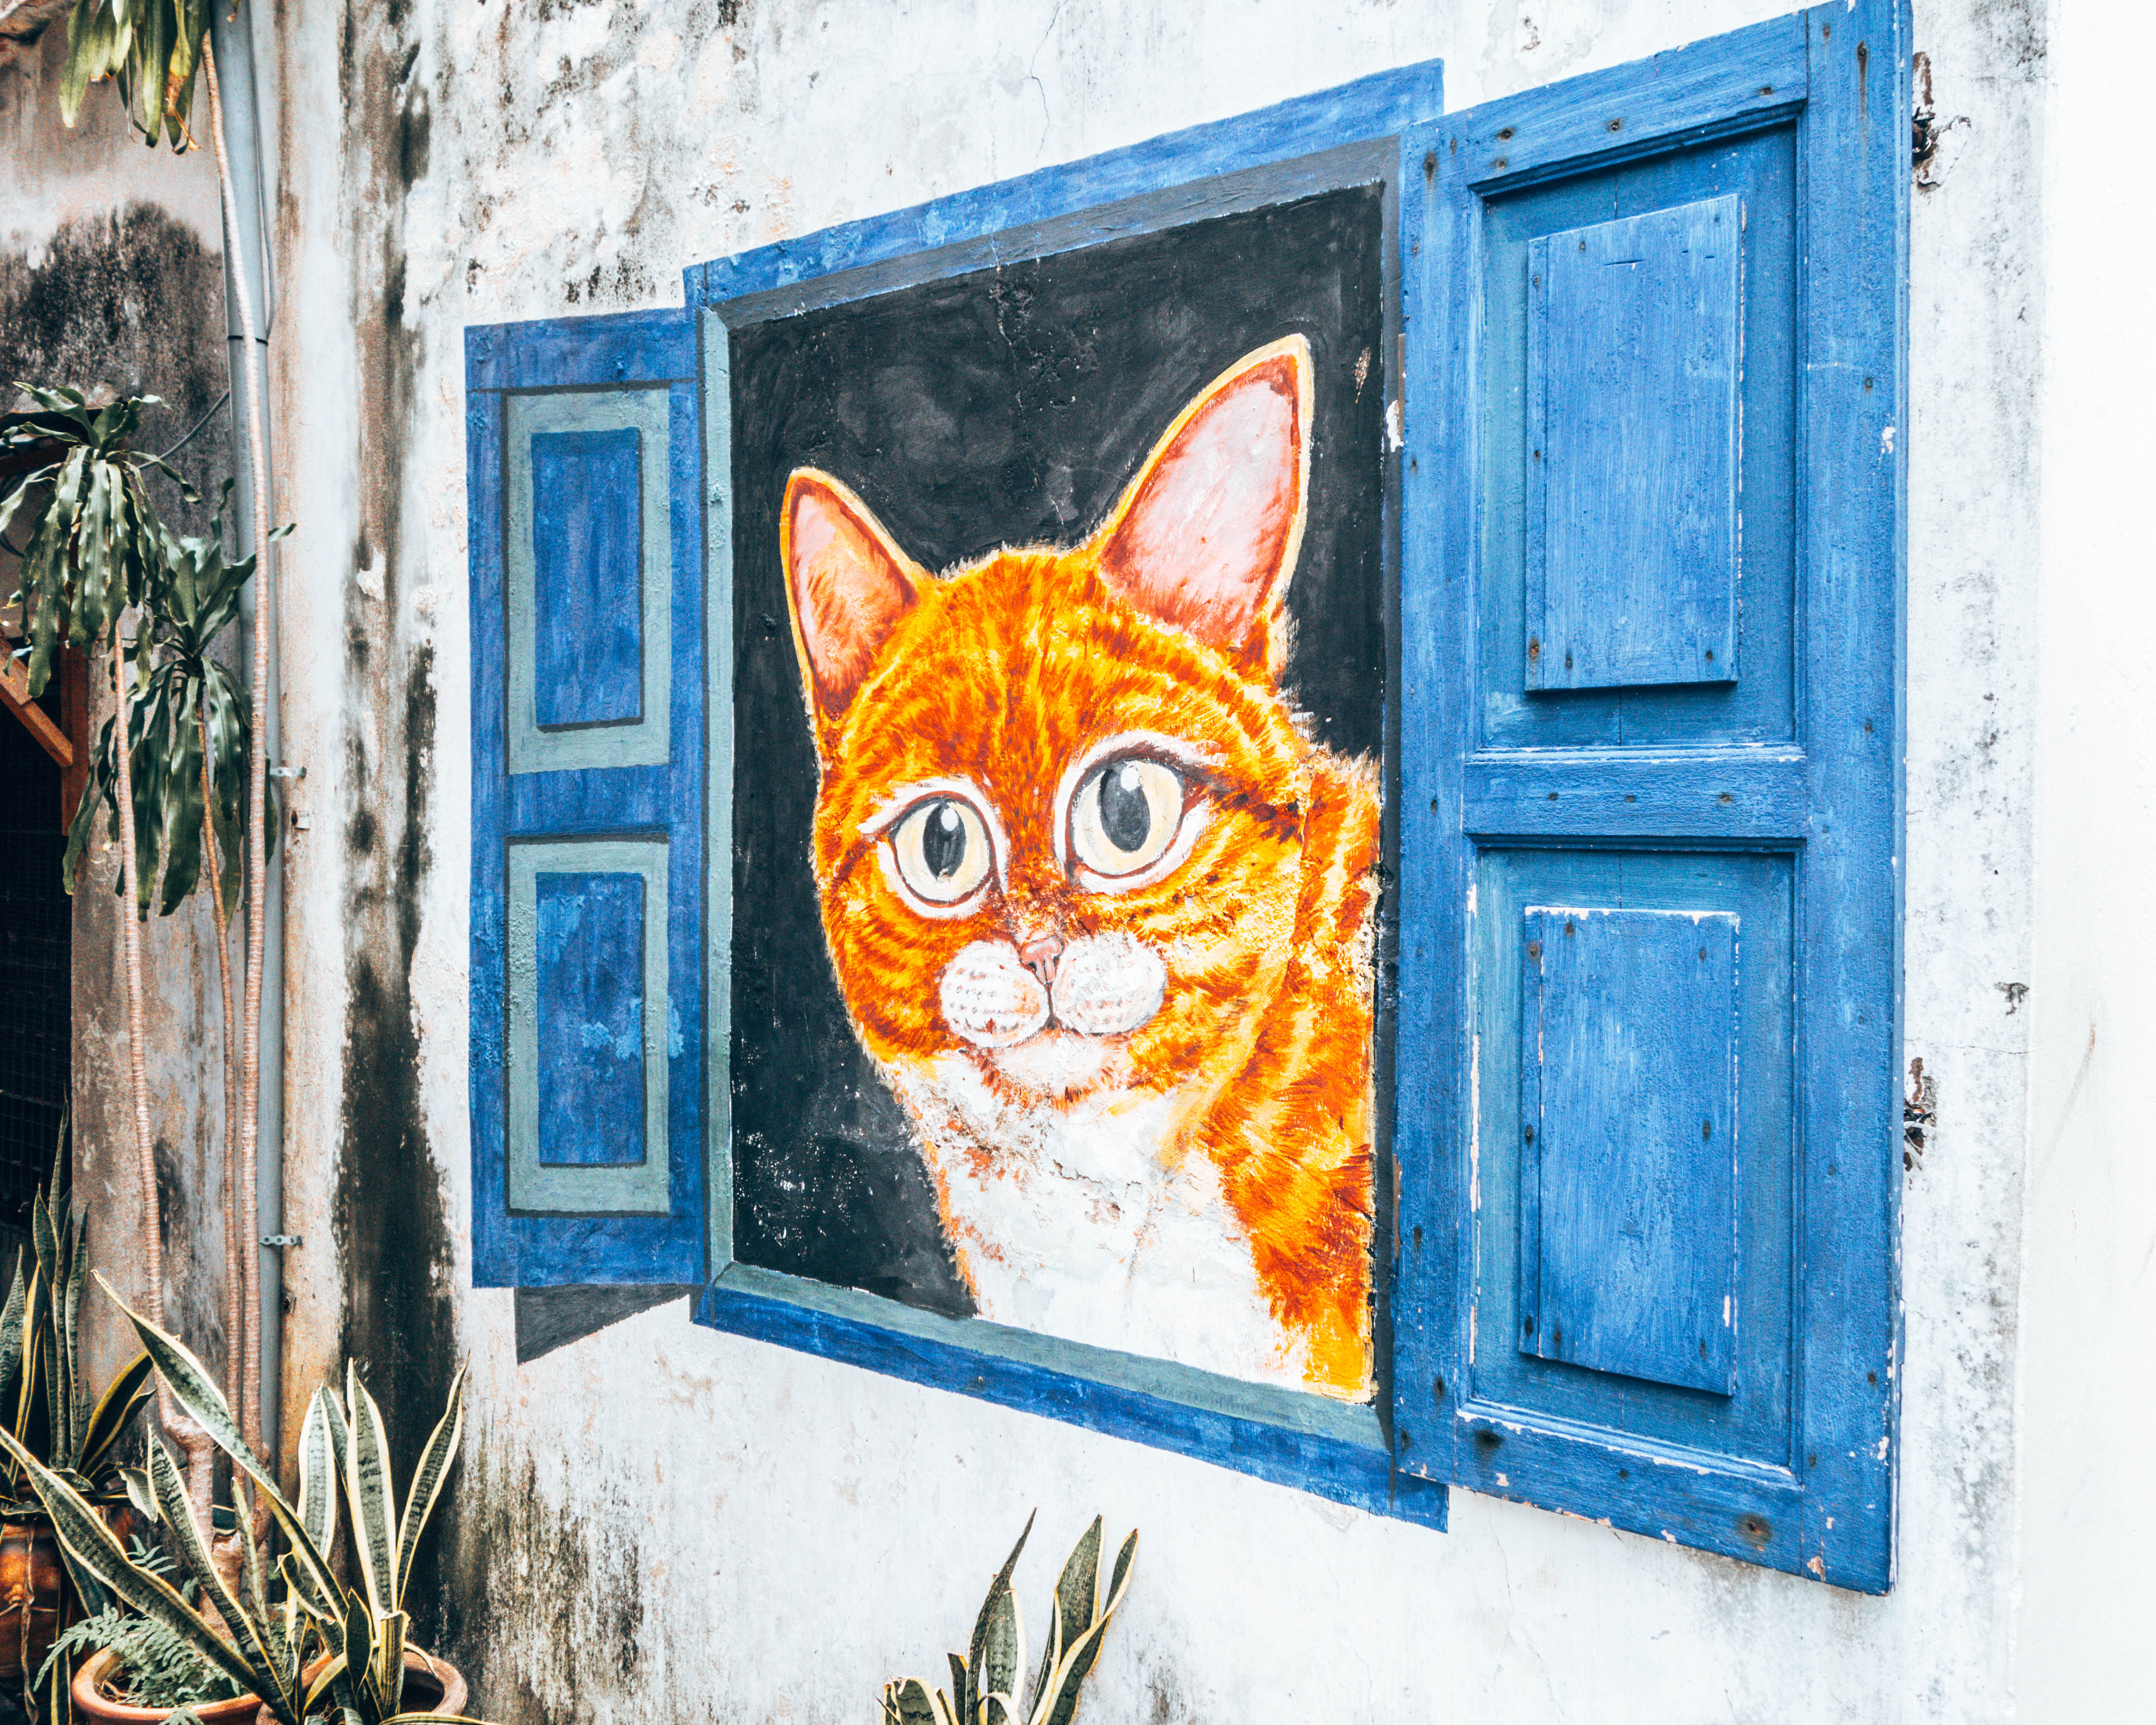 Artists for stray animals. Street art in Penang, Georgetown, Malaysia - Wediditourway.com